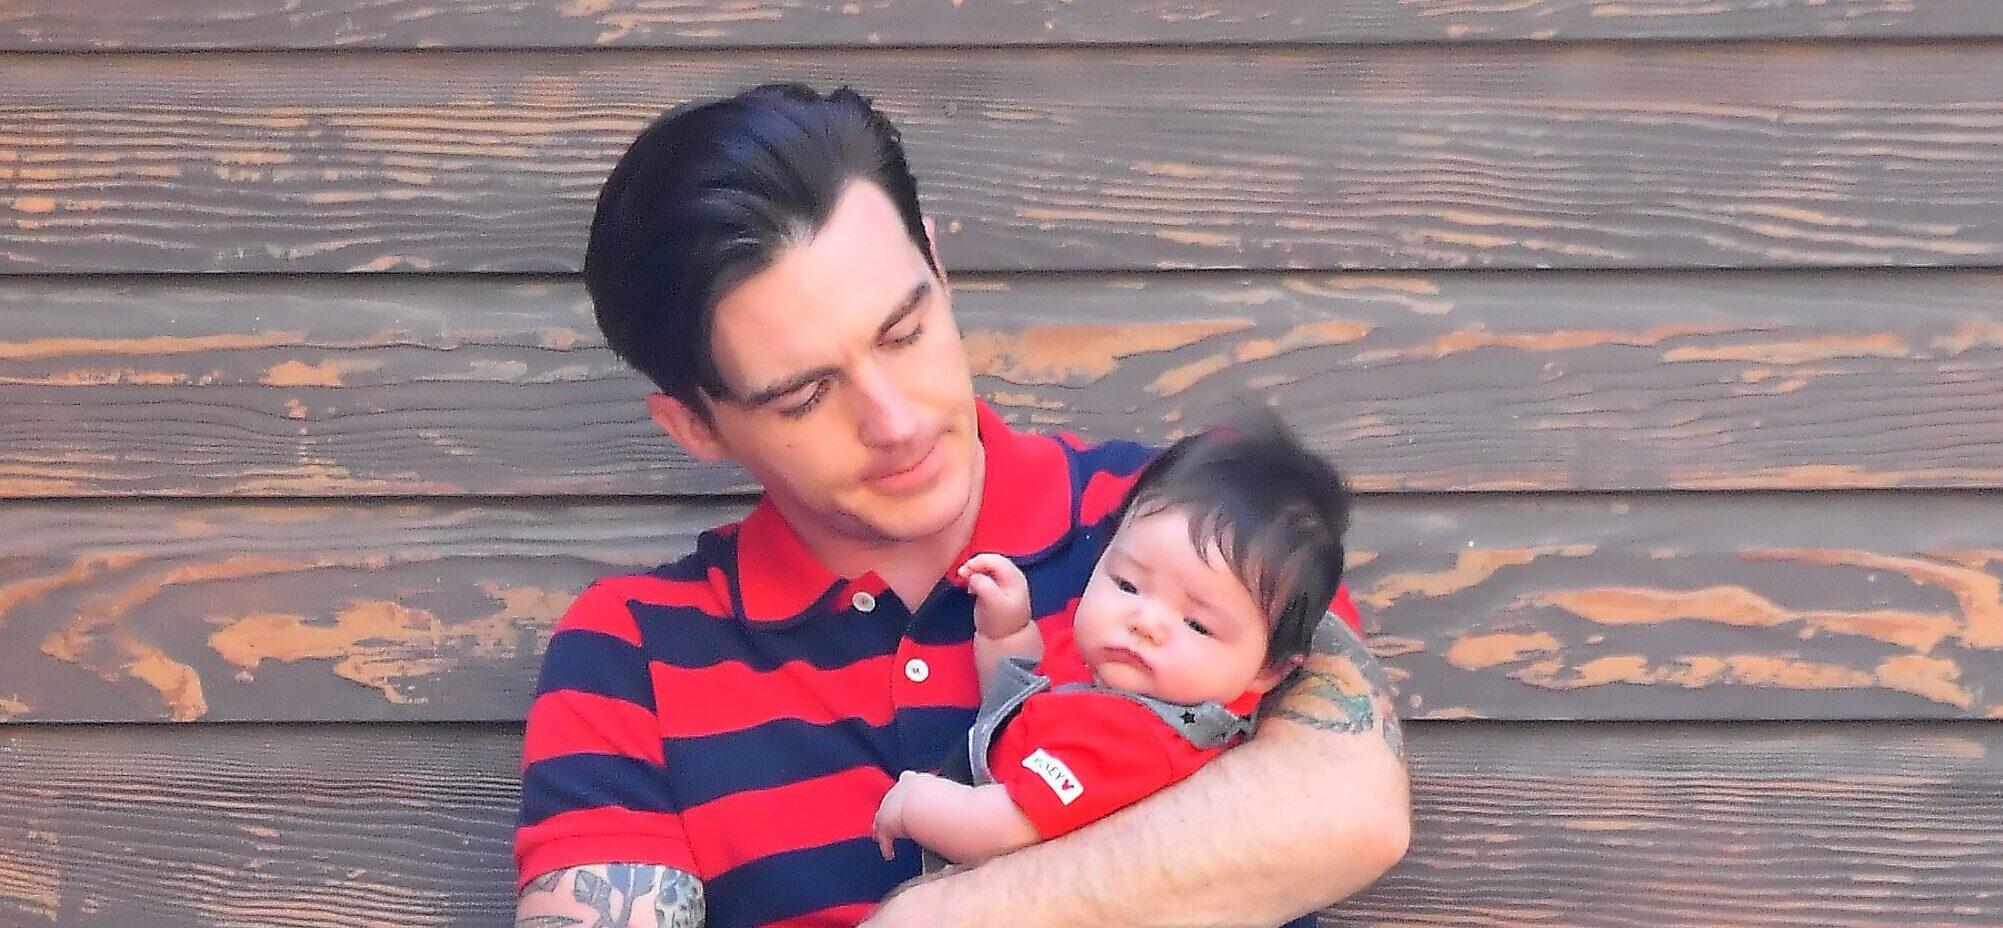 Drake Bell’s Wife Wants FULL Custody Of Their Son Days After He Was Reported ‘Missing’